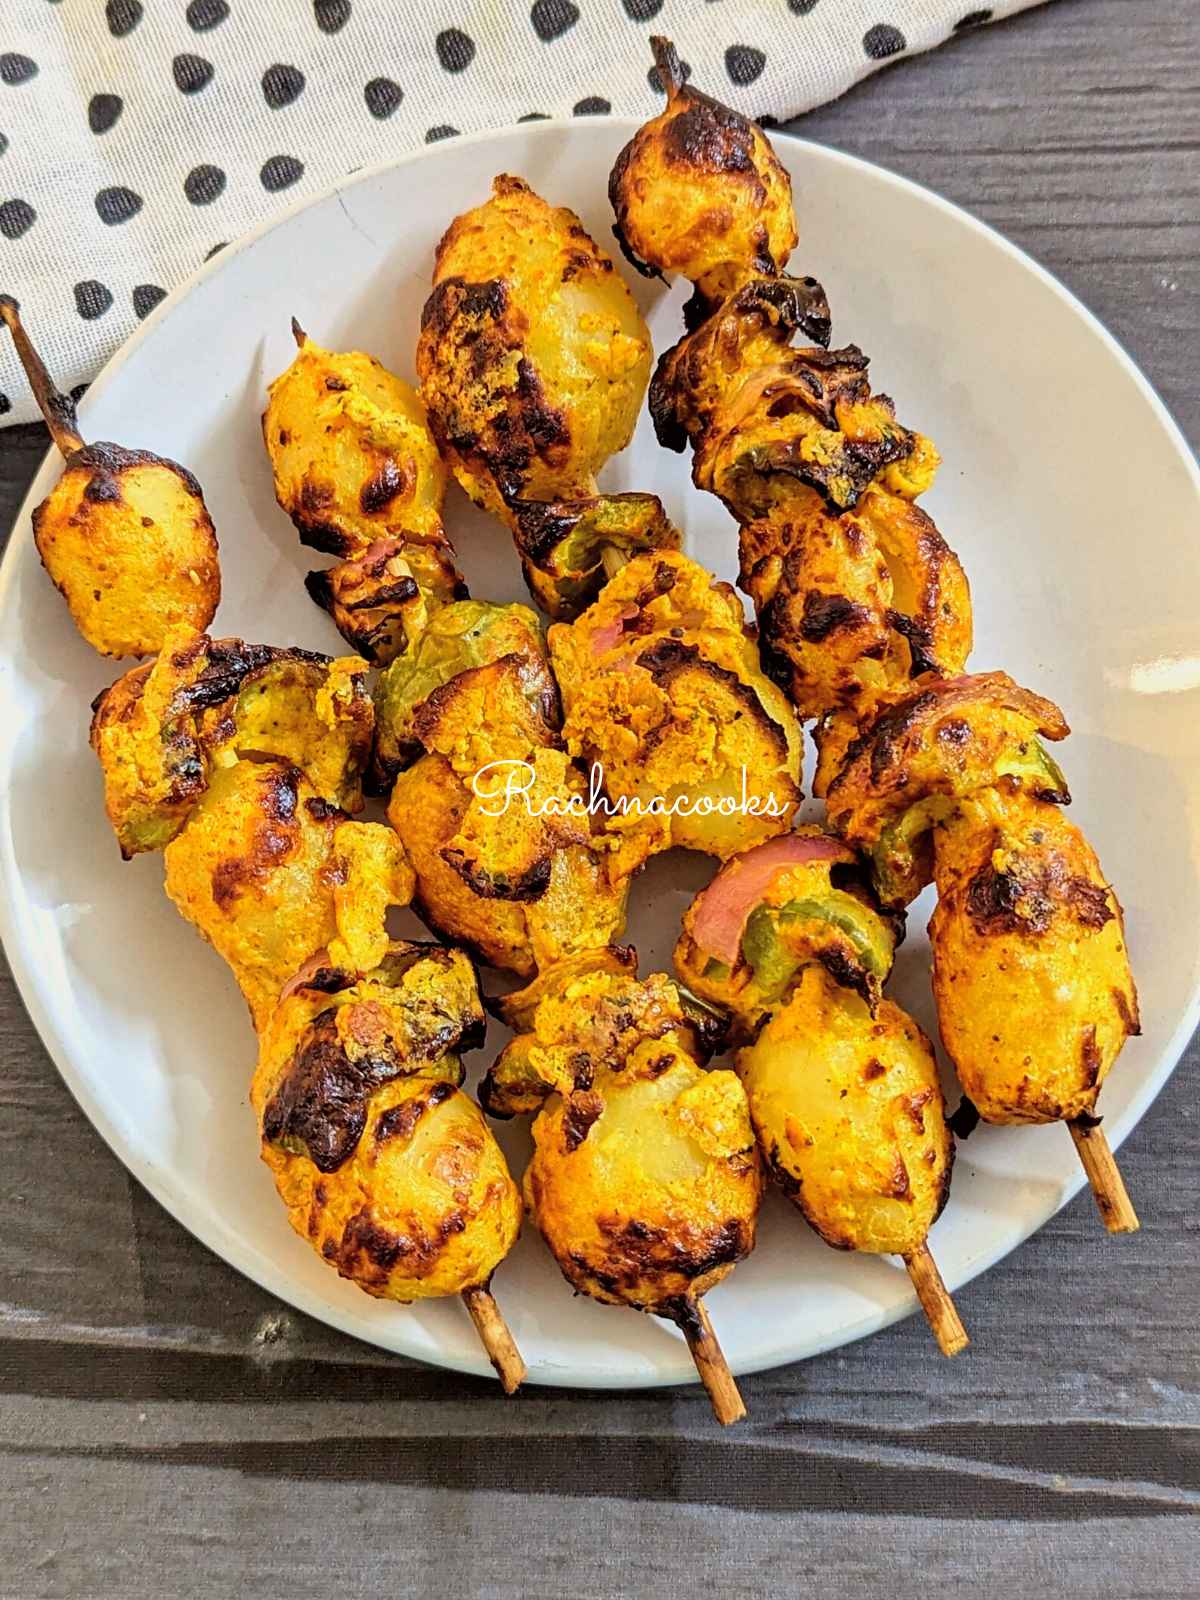 4 skewers of marinated potatoes, pepper and onion after air frying served on a white plate.